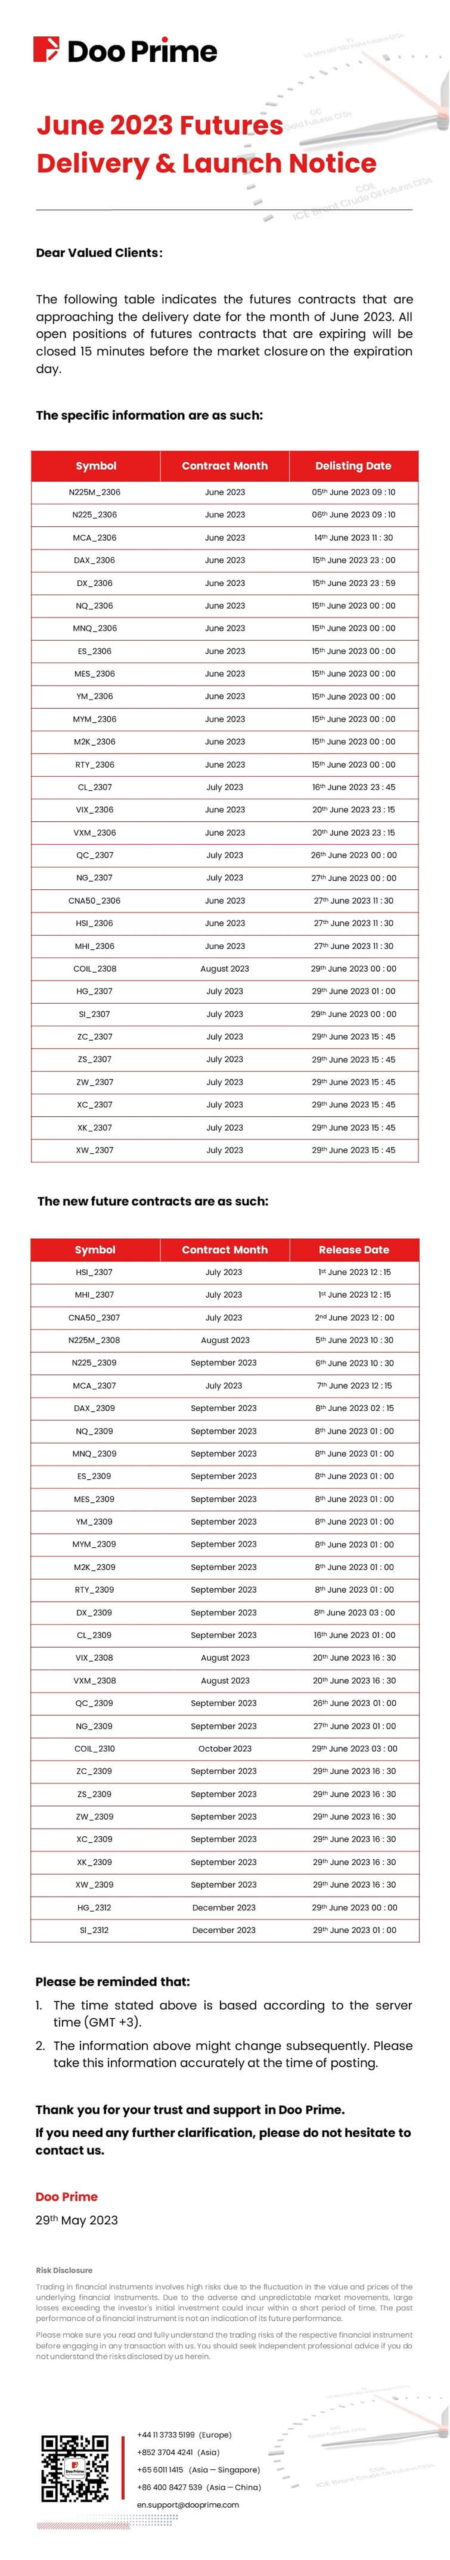 Doo Prime June 2023 Futures Delivery & Launch Notice